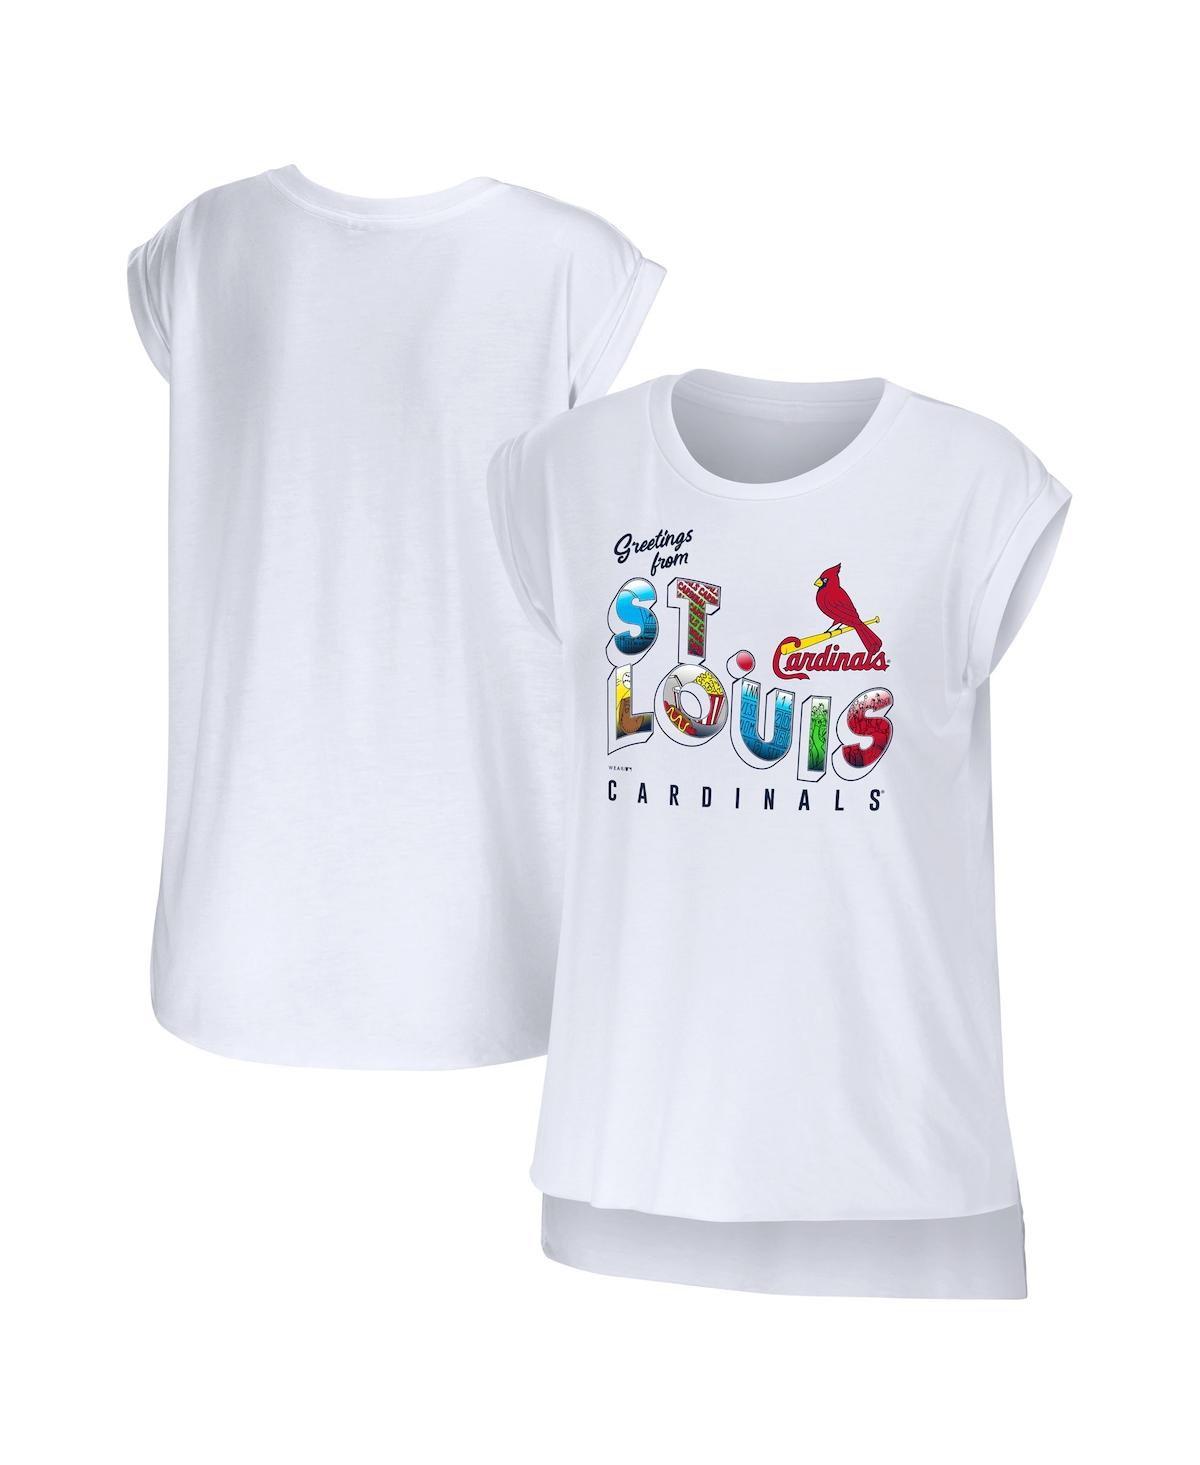 Shop Wear By Erin Andrews Women's  White St. Louis Cardinals Greetings From T-shirt